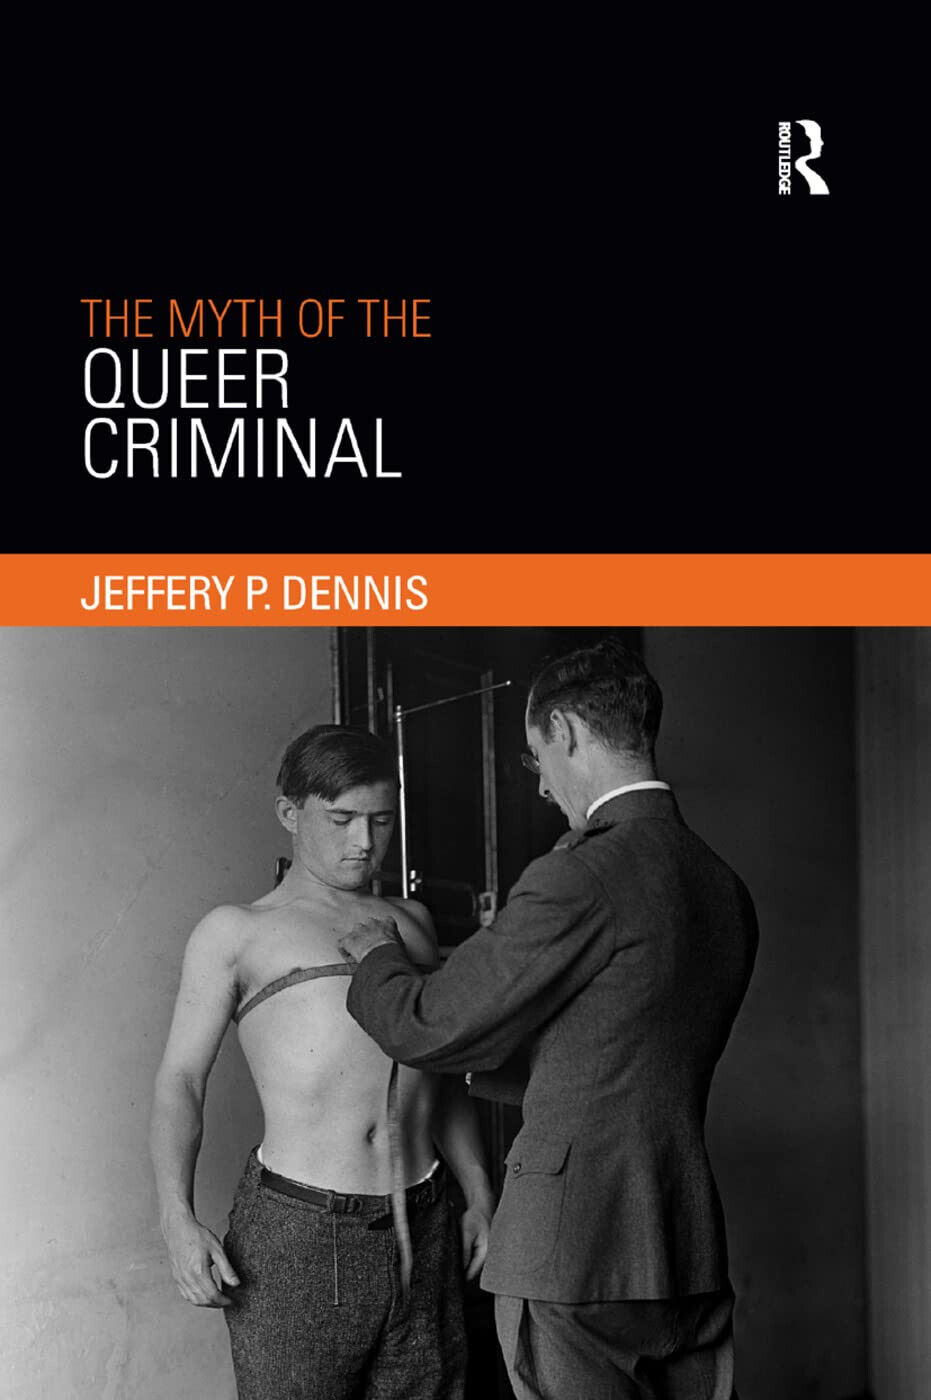 The Myth of the Queer Criminal - Jeffery P Dennis - Routledge, 2019